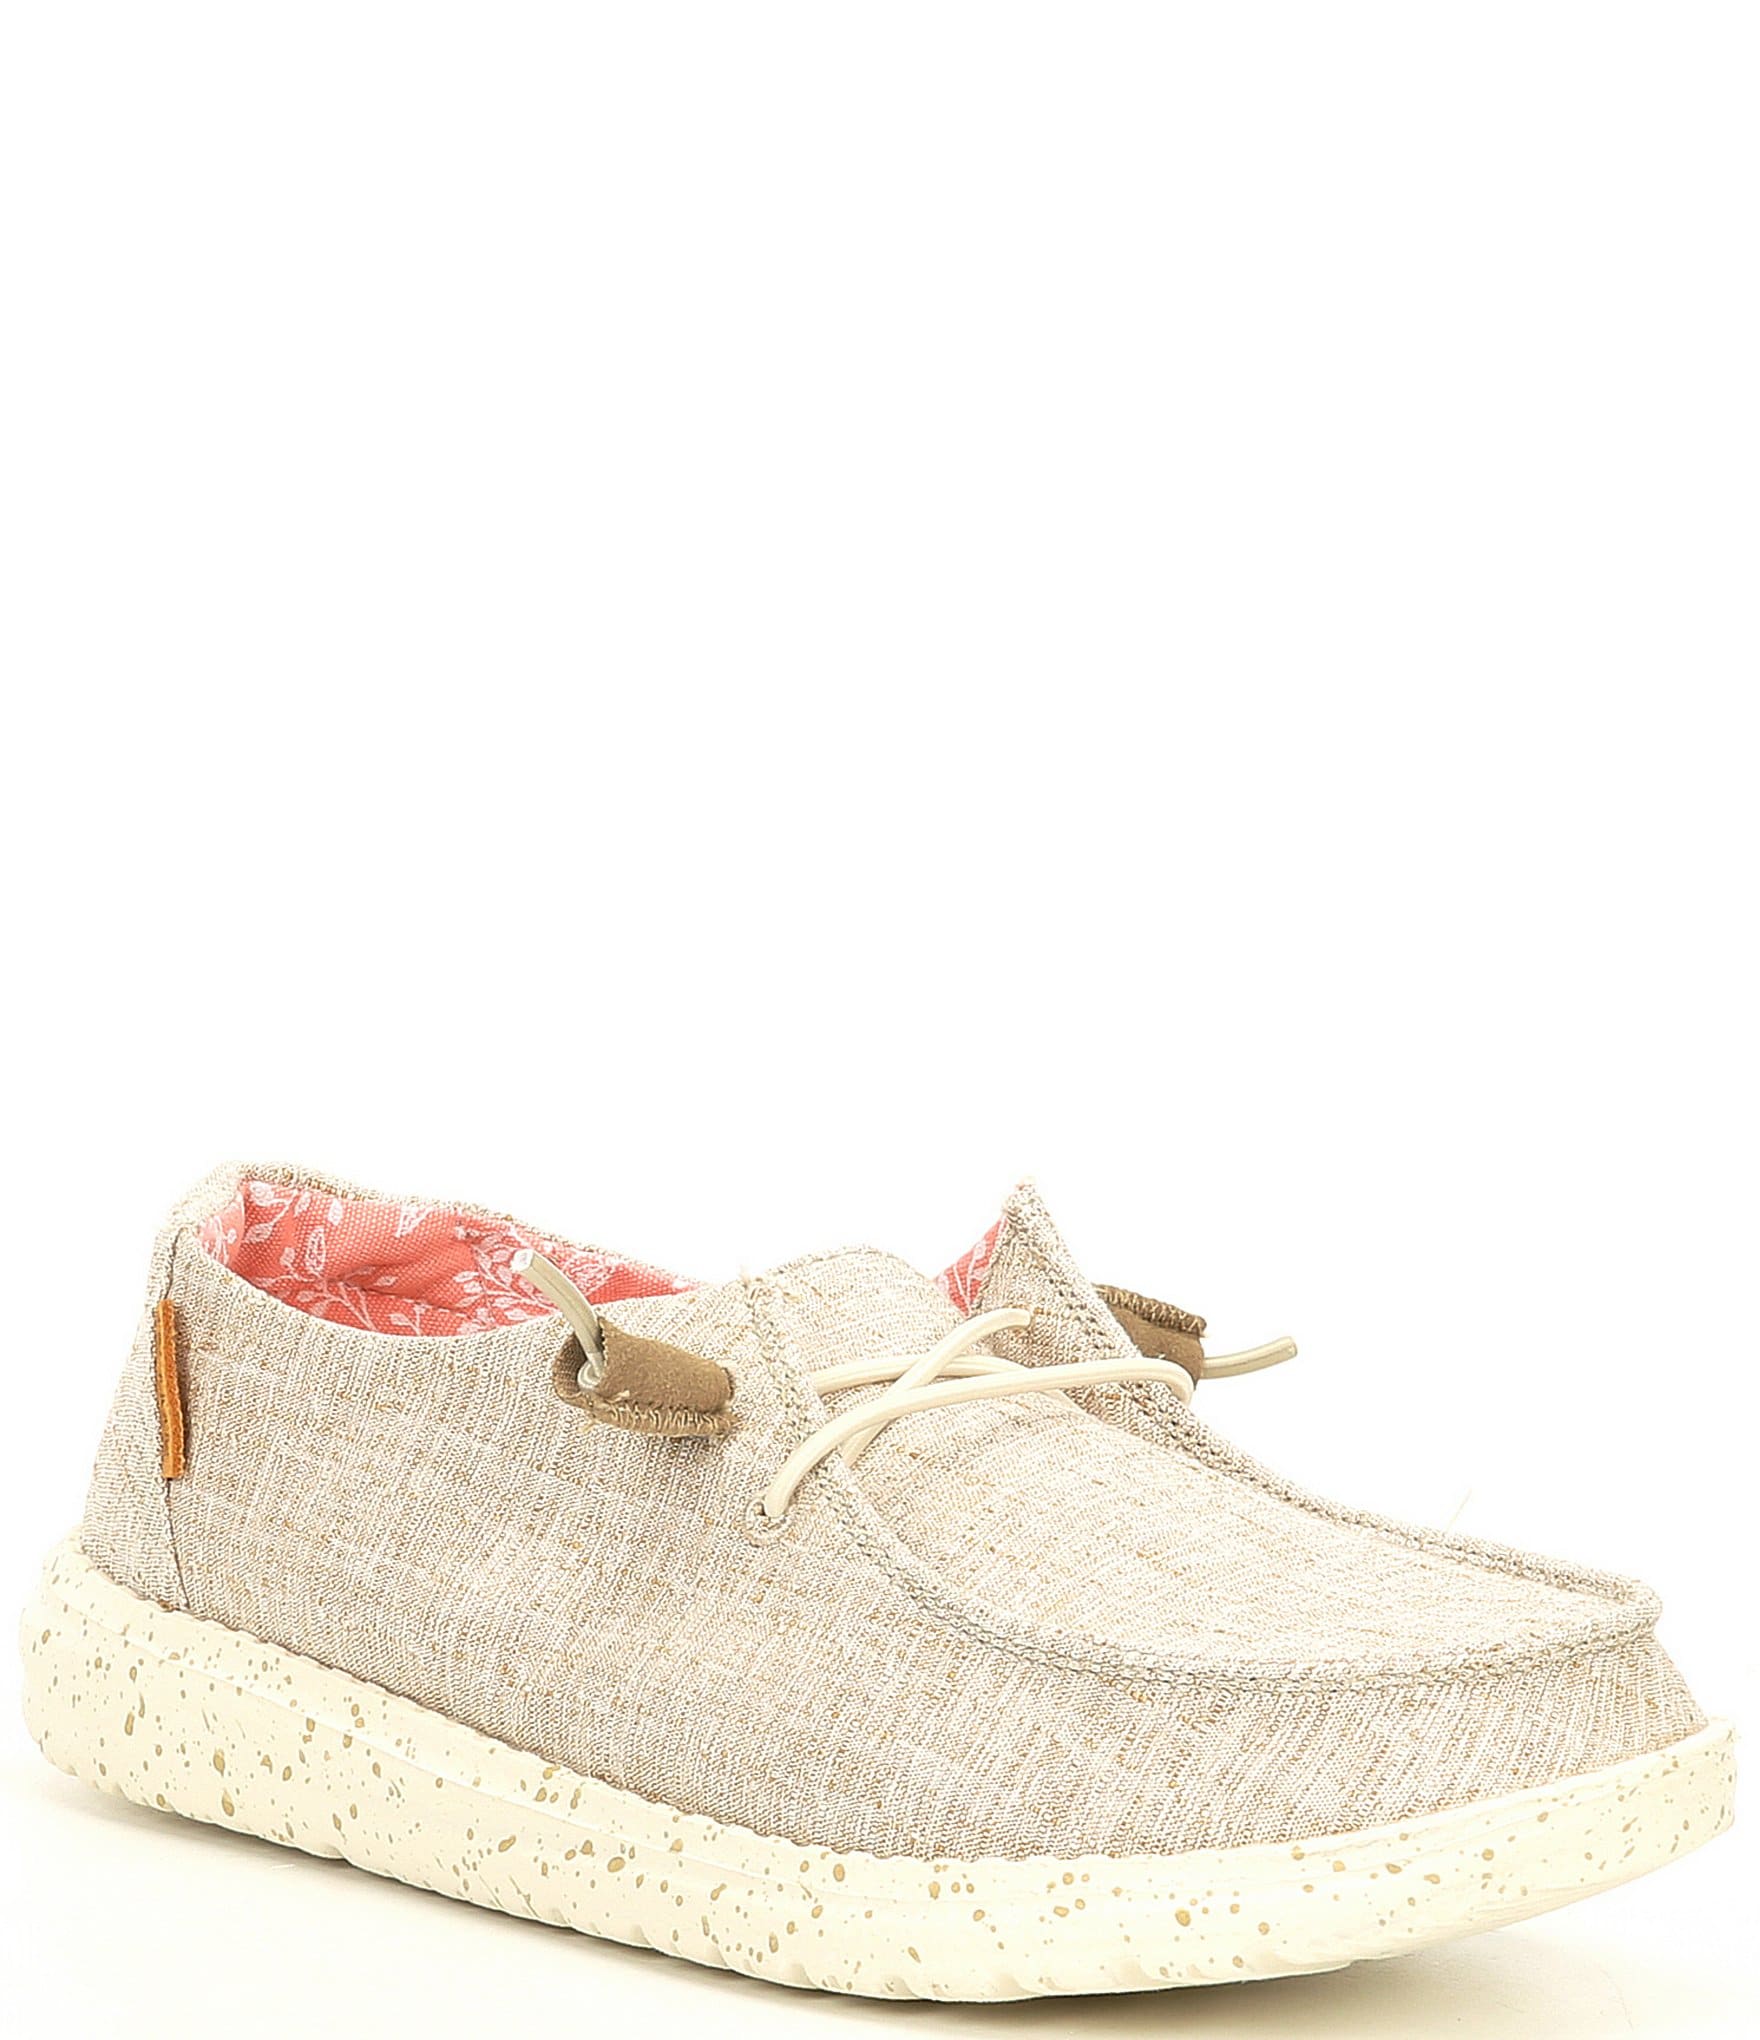 Bomgaars : HEY DUDE Wendy Chambray Woven Slip-On Casual Shoe